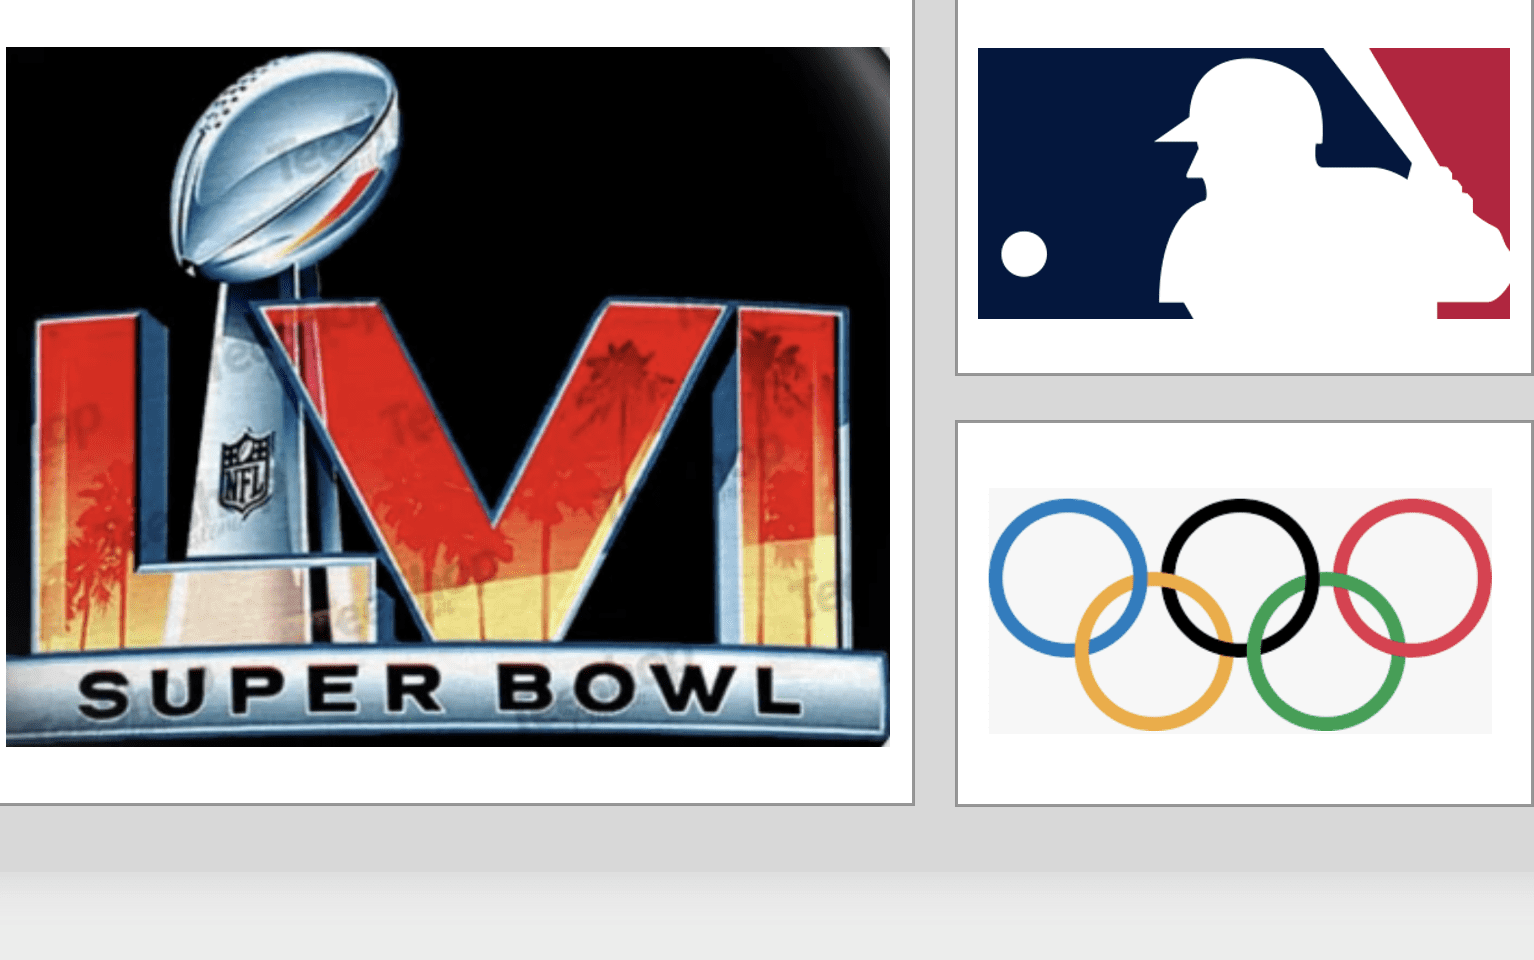 The logos for the super bowl and the olympics.